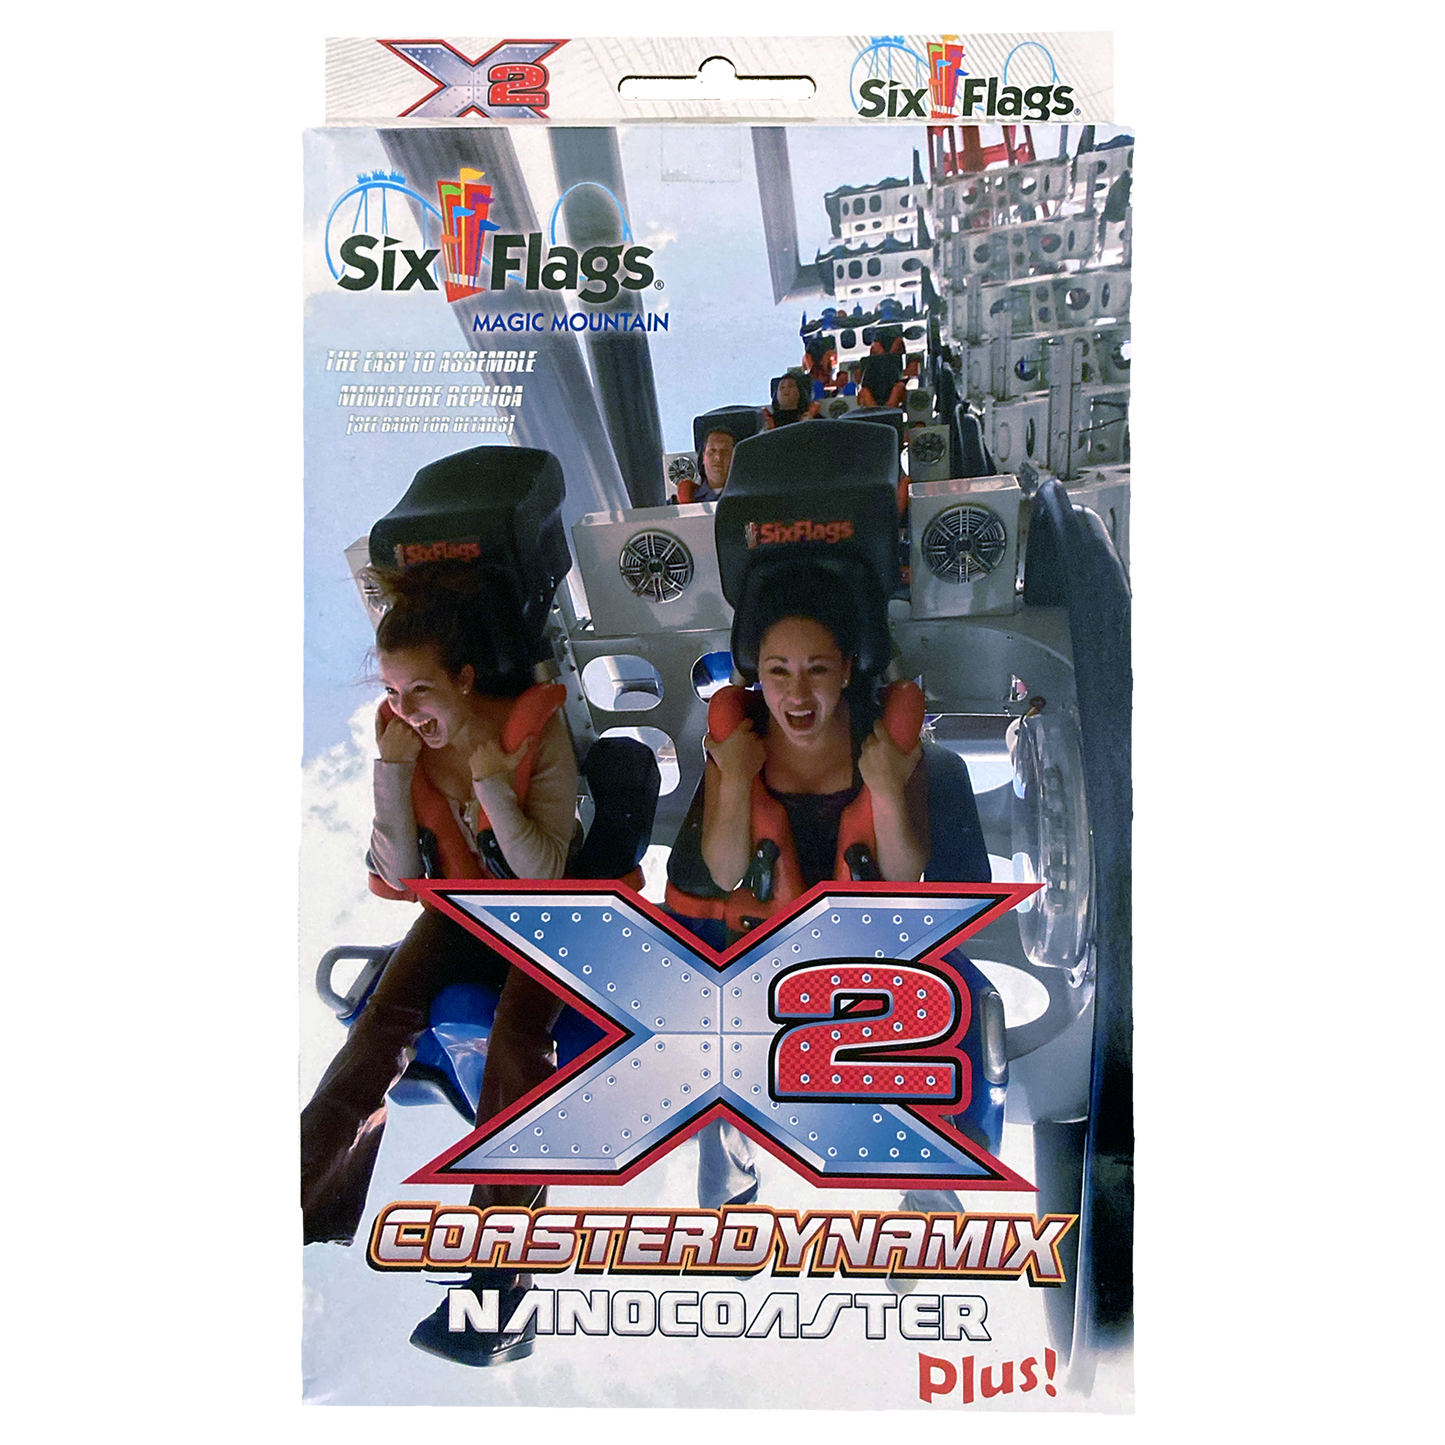 Six Flags Magic Mountain X2 Nanocoaster Plus package front